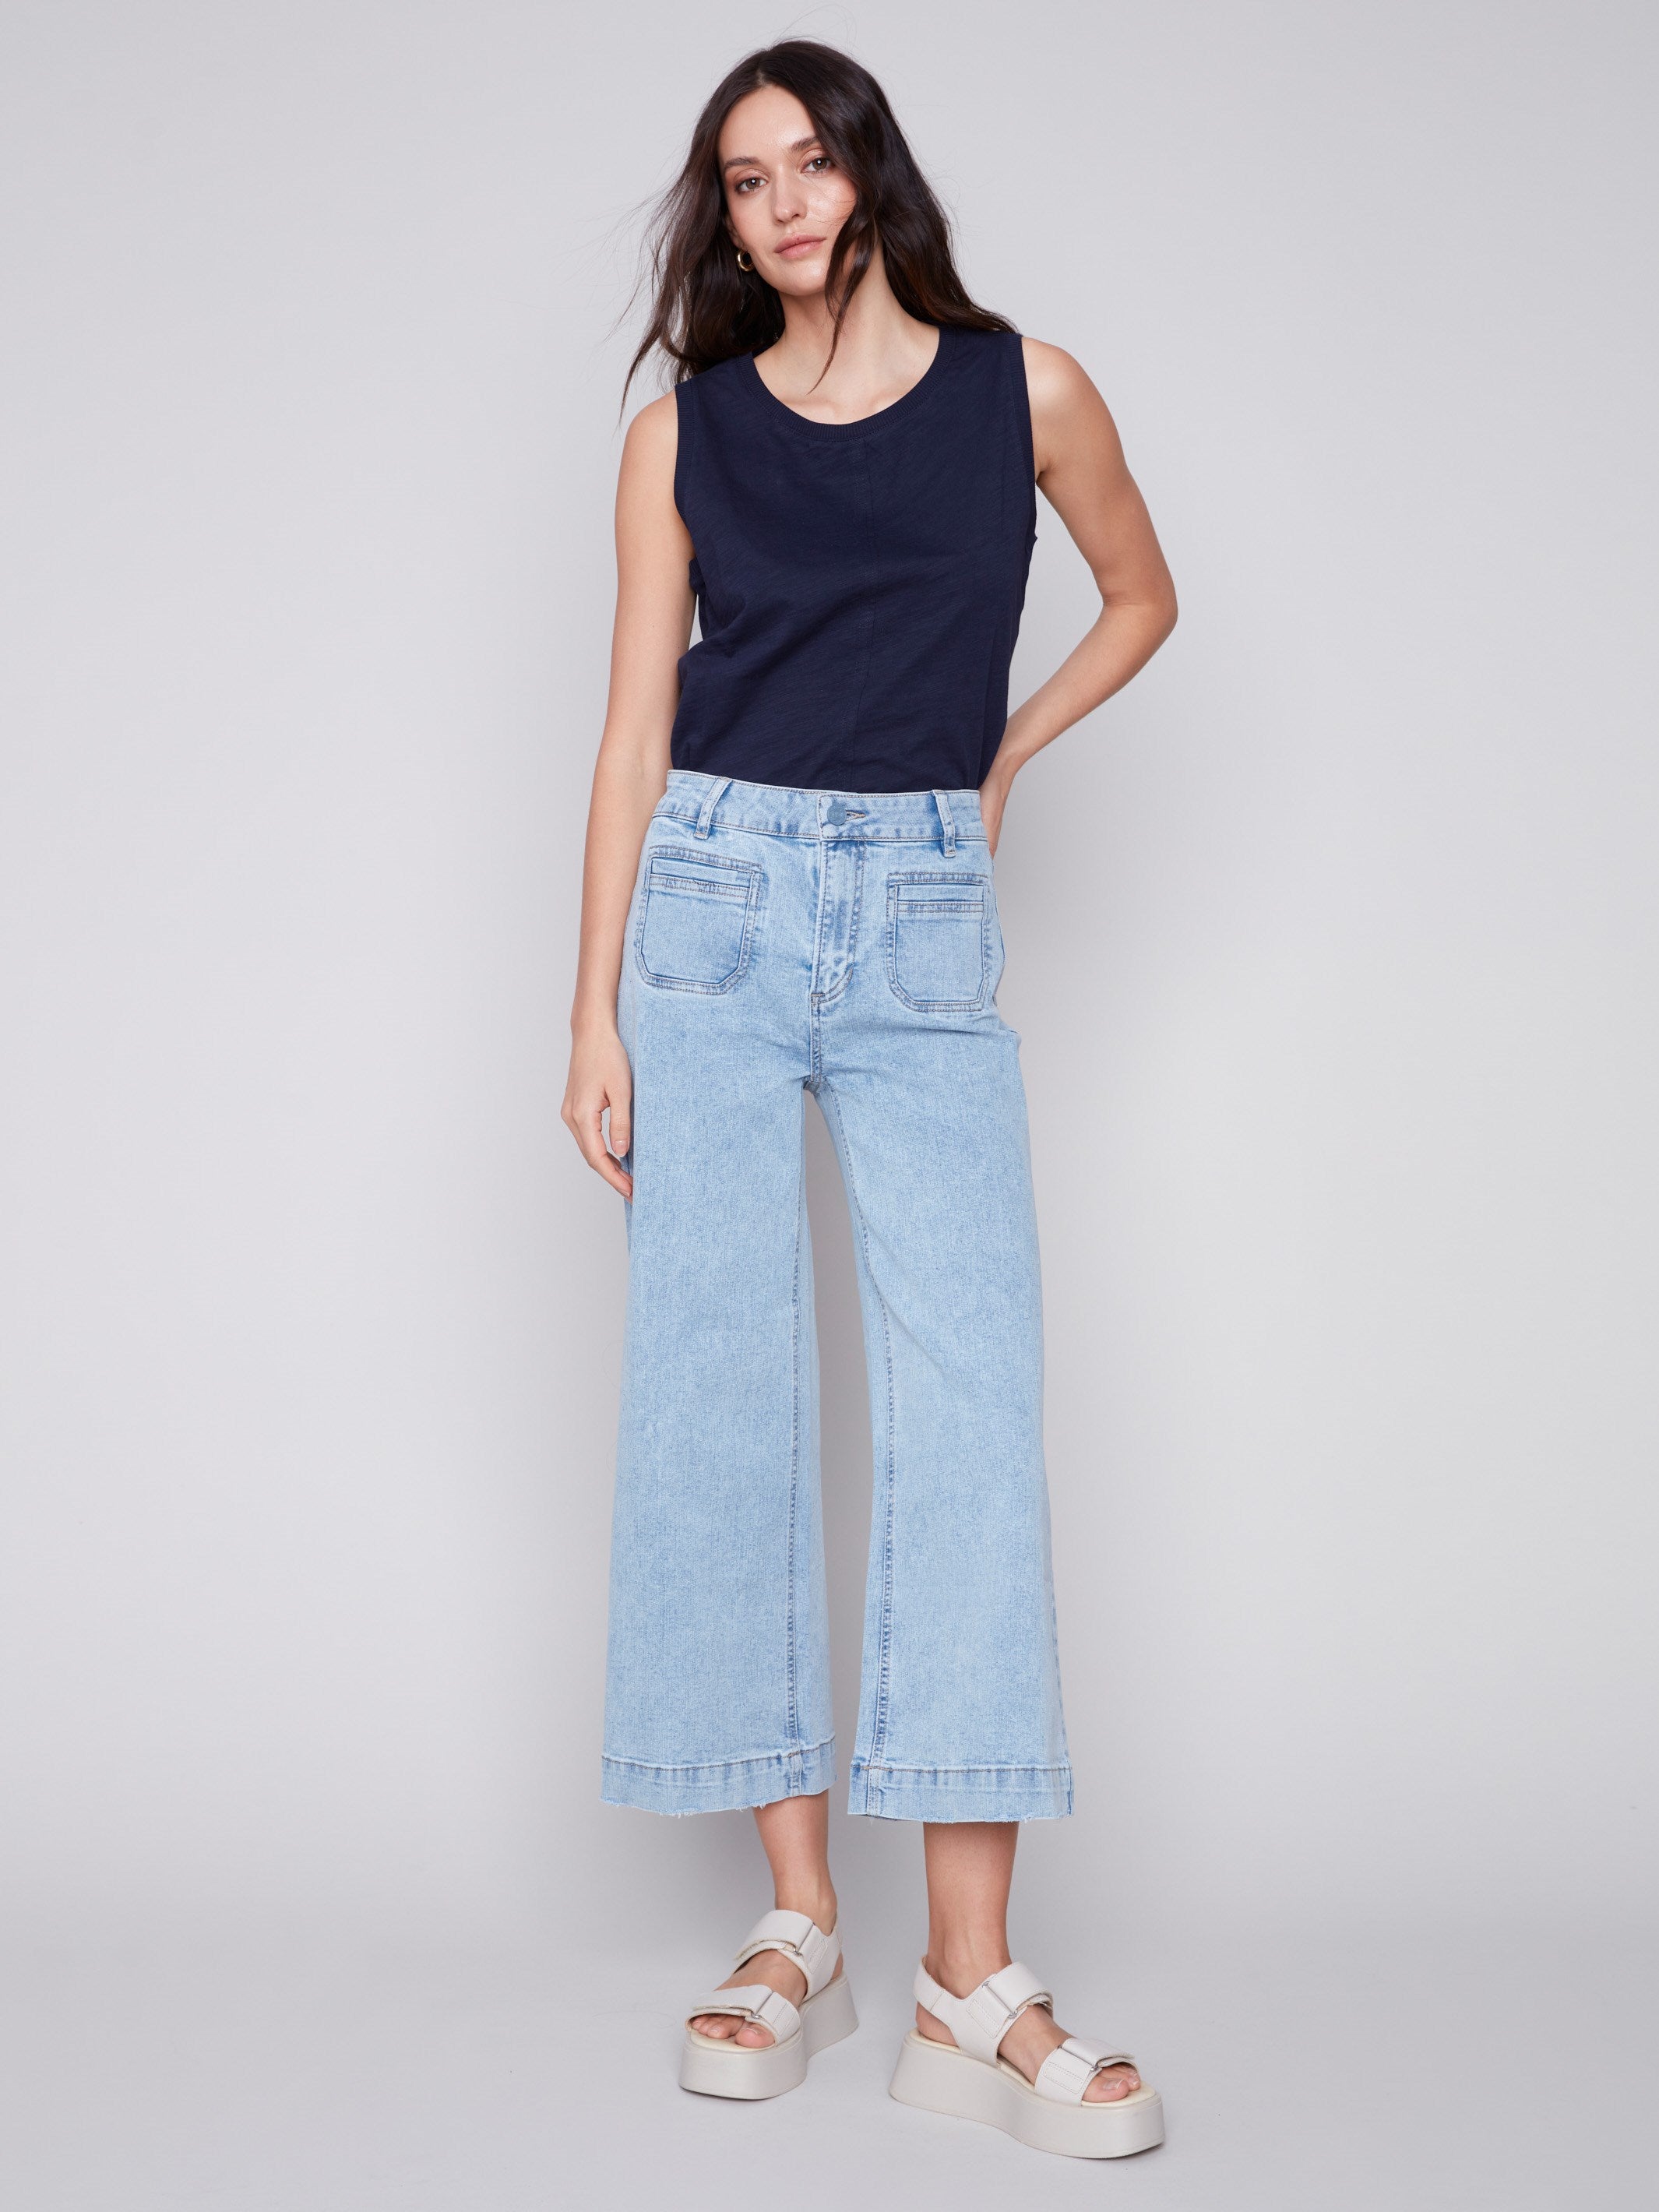 Cropped Wide Leg Jeans - Blue Jean - Charlie B Collection Canada - Image 4